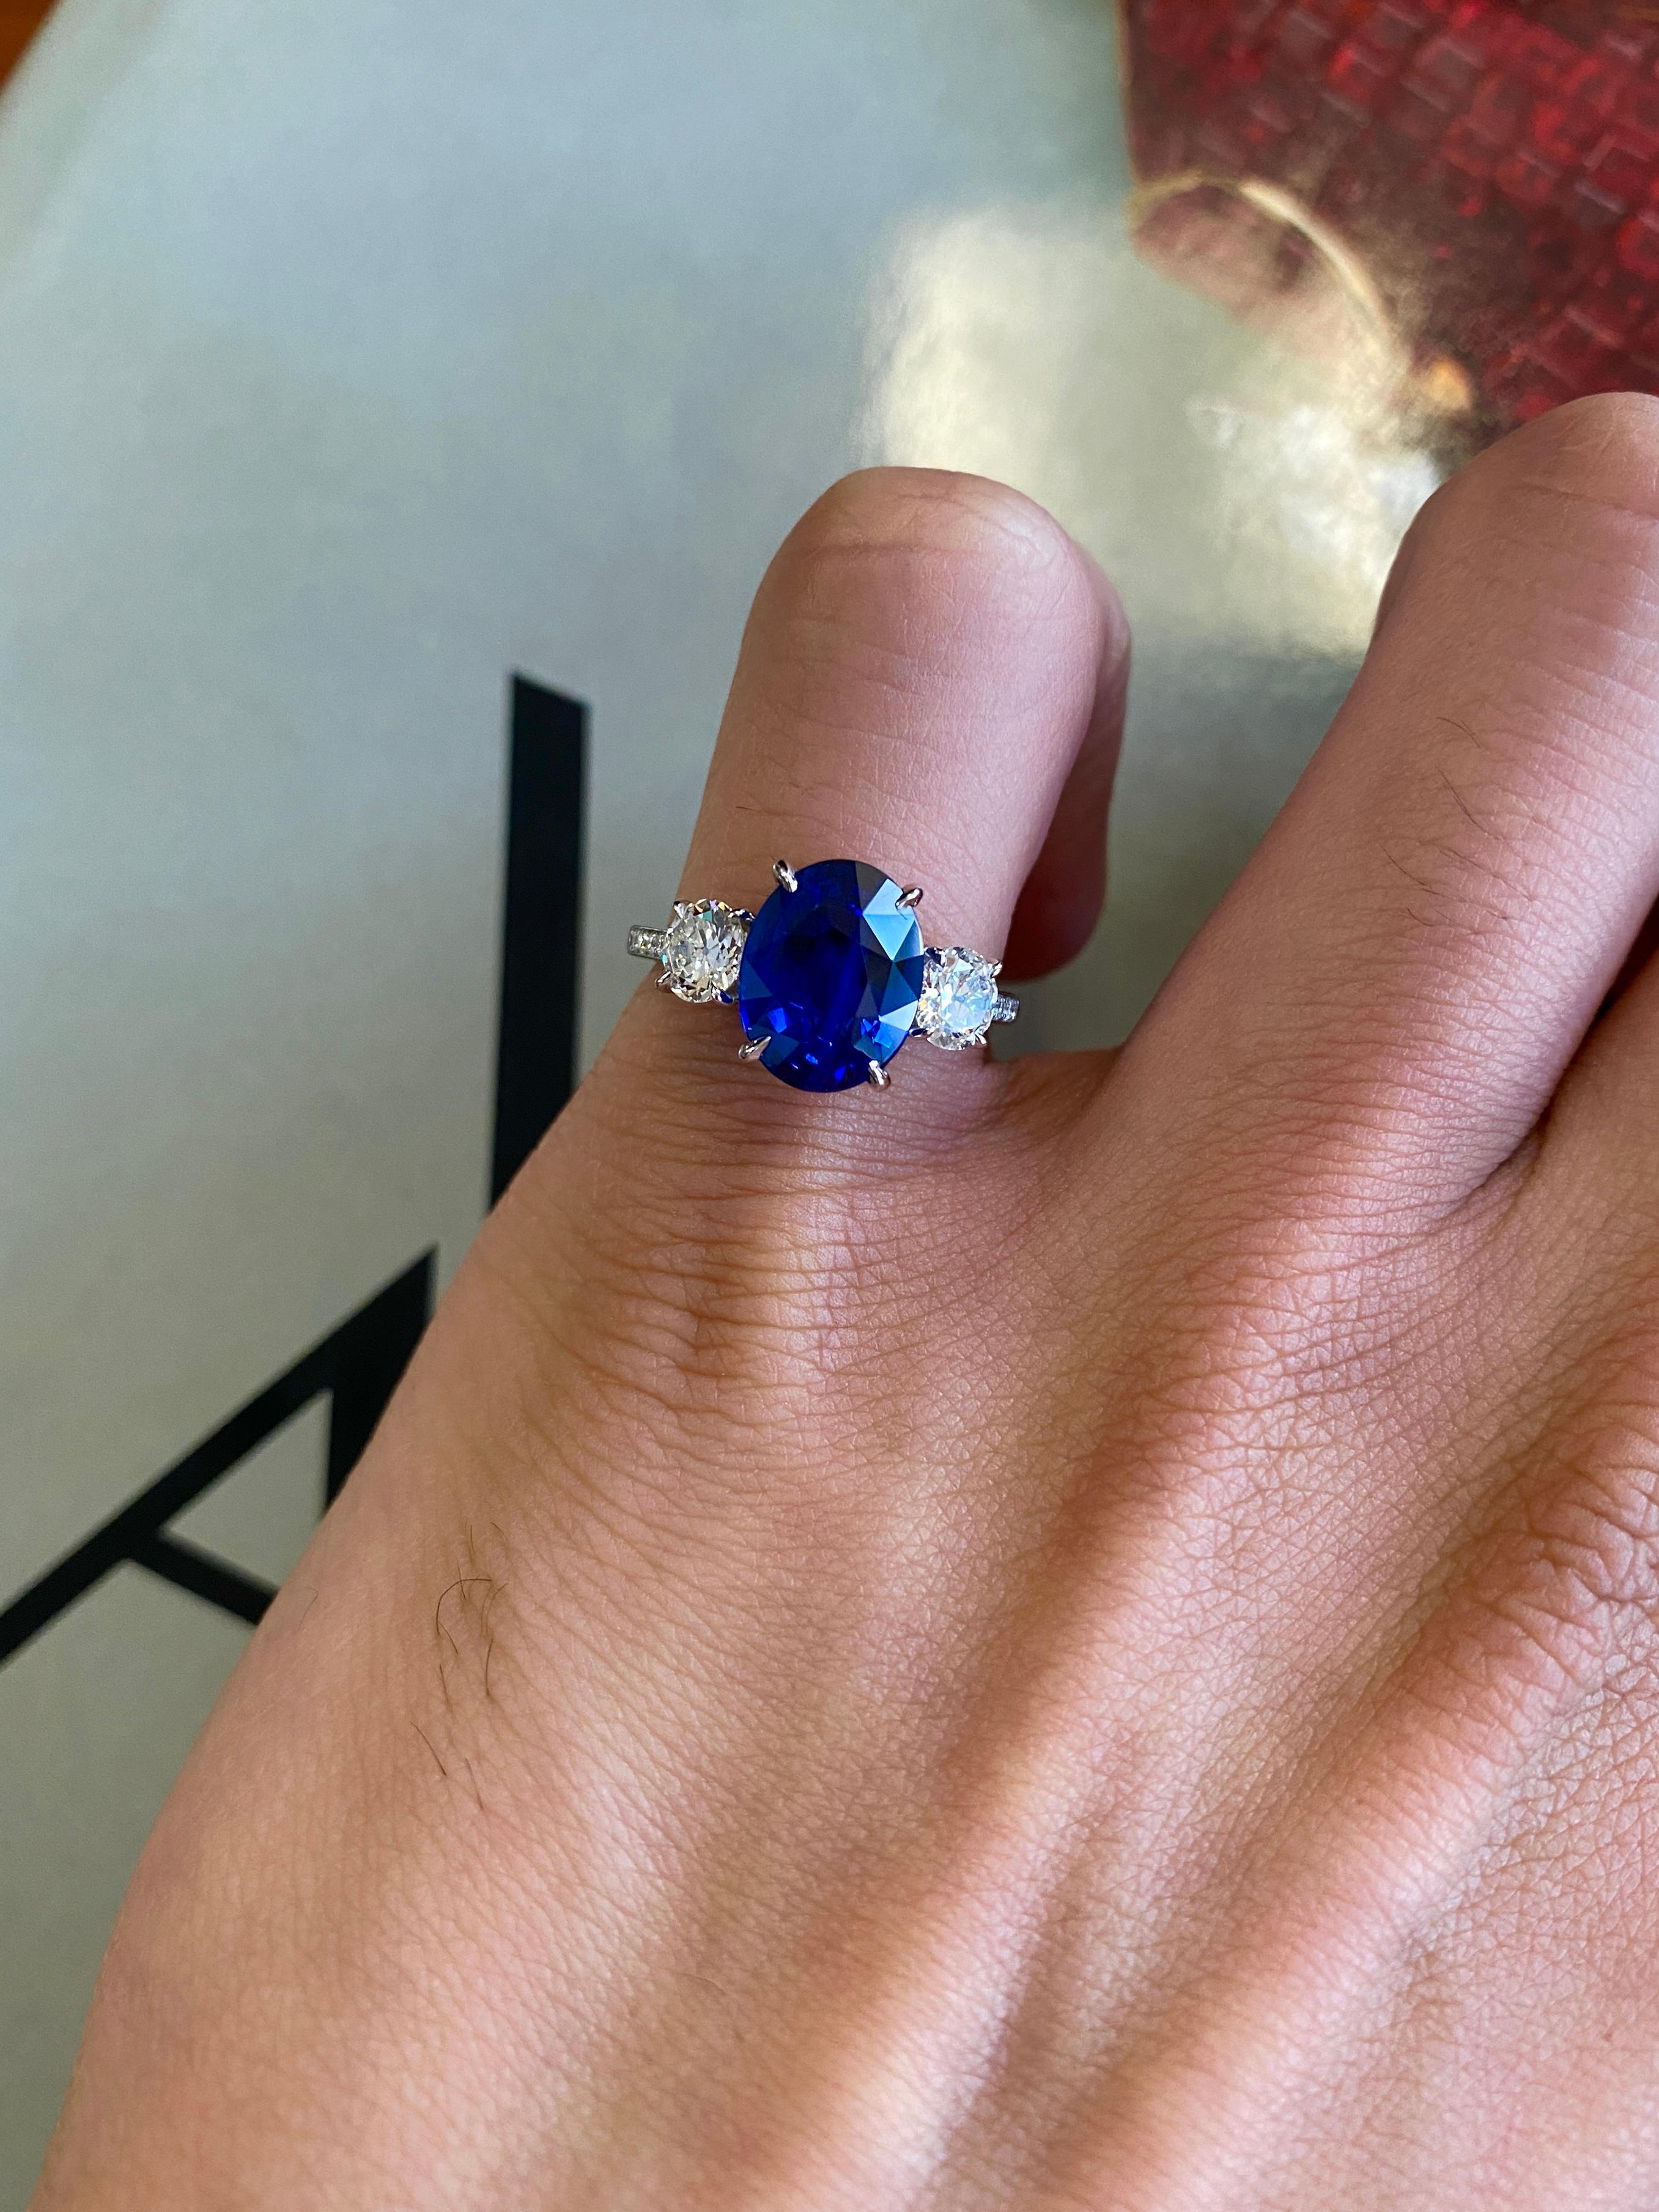 This ring features an absolutely gorgeous 4.04 carat gem oval Sapphire, certified by C. Dunaigre of Switzerland. The stone is a very rich royal blue, not overly dark, with tremendous fire and sparkle. Its origin is Ceylon (Sri Lanka) and is only